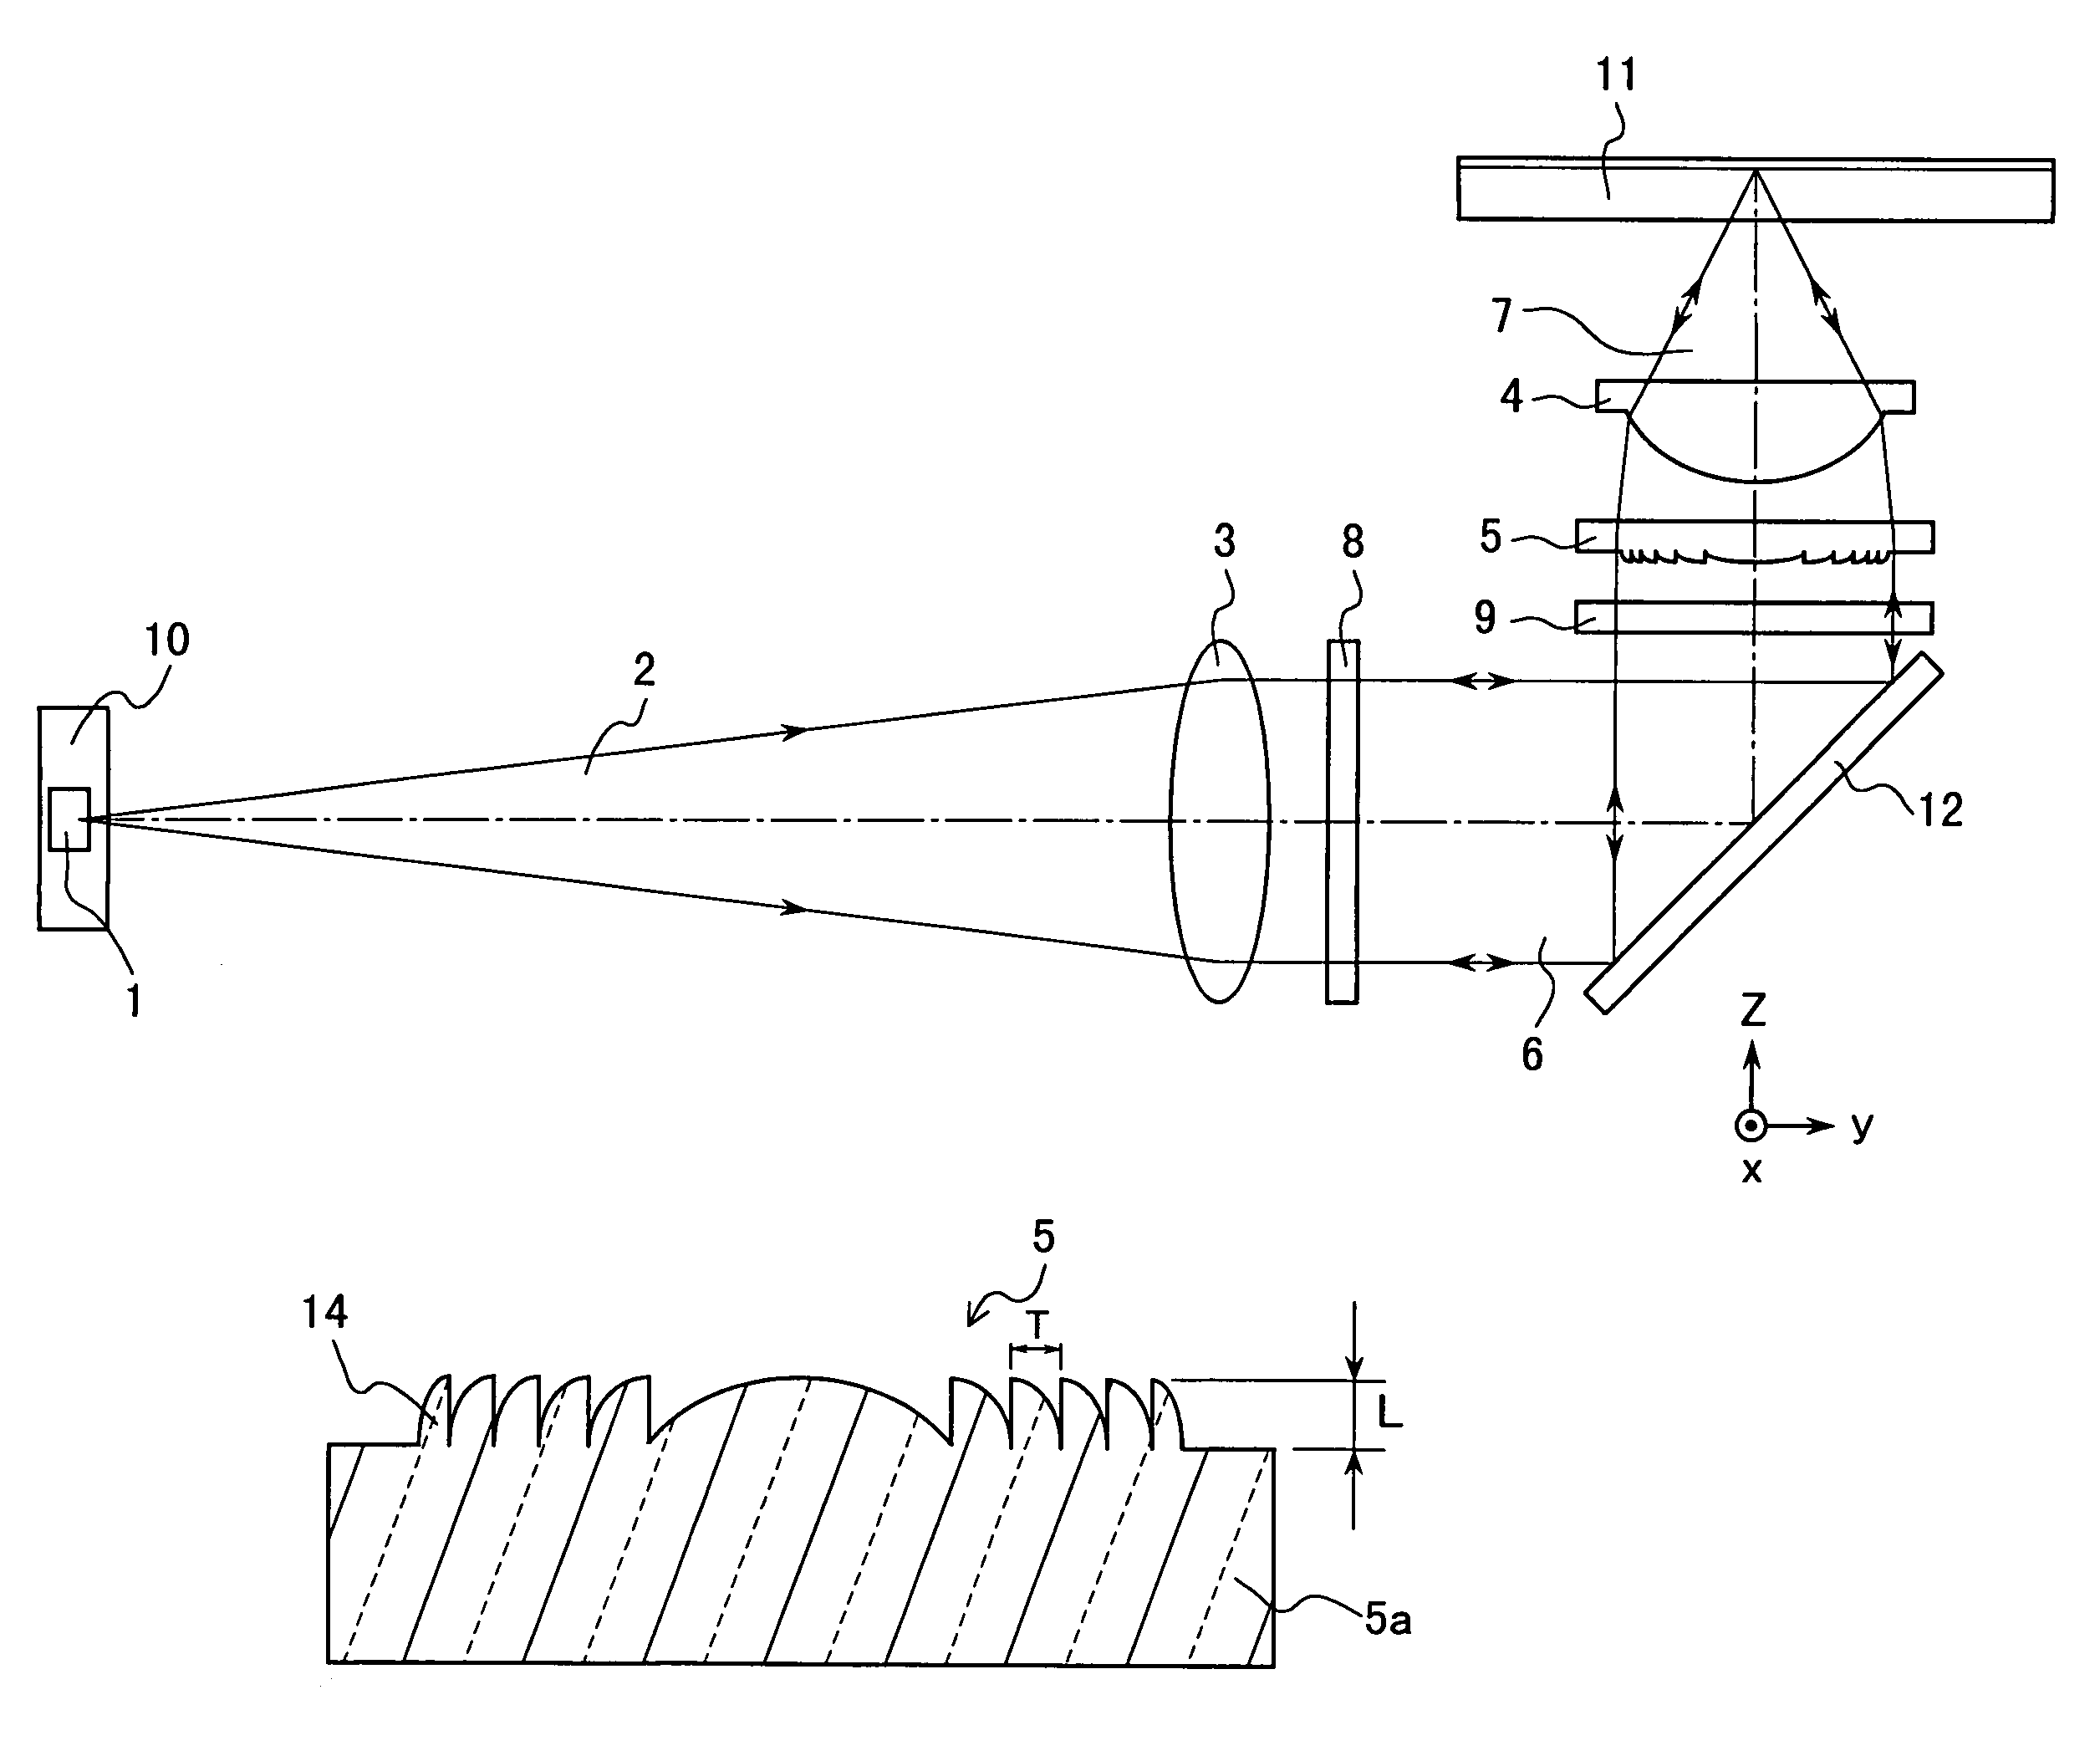 Optical head with defocusing correction and spherical aberration correction